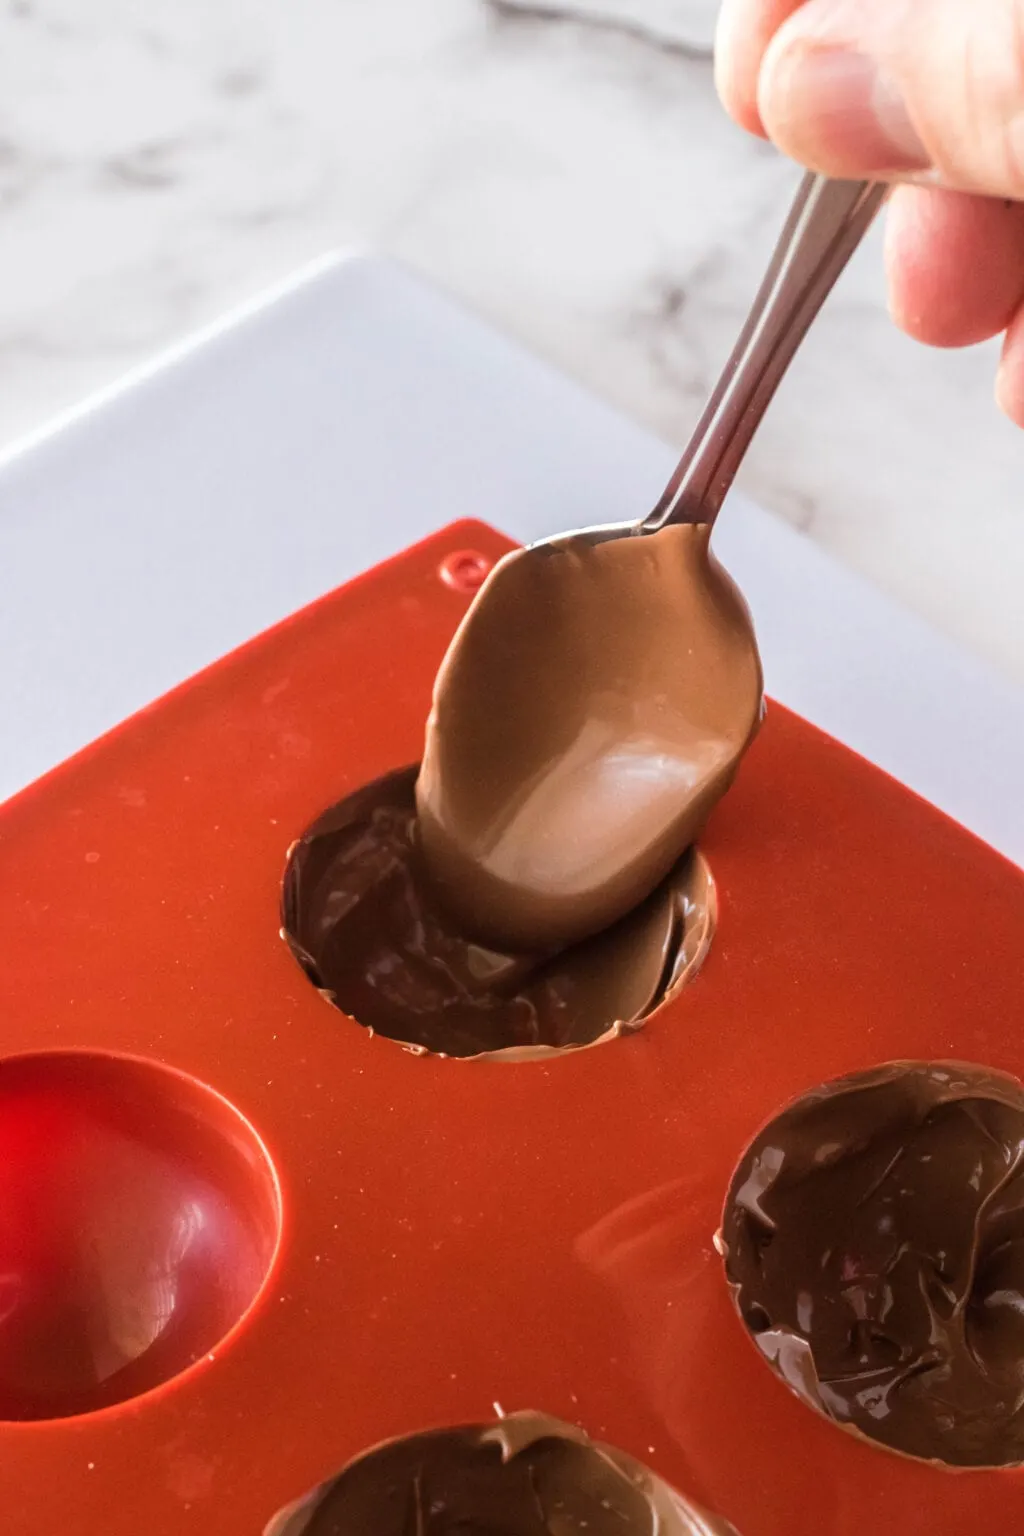 spoon putting melted chocolate into a silicone mold